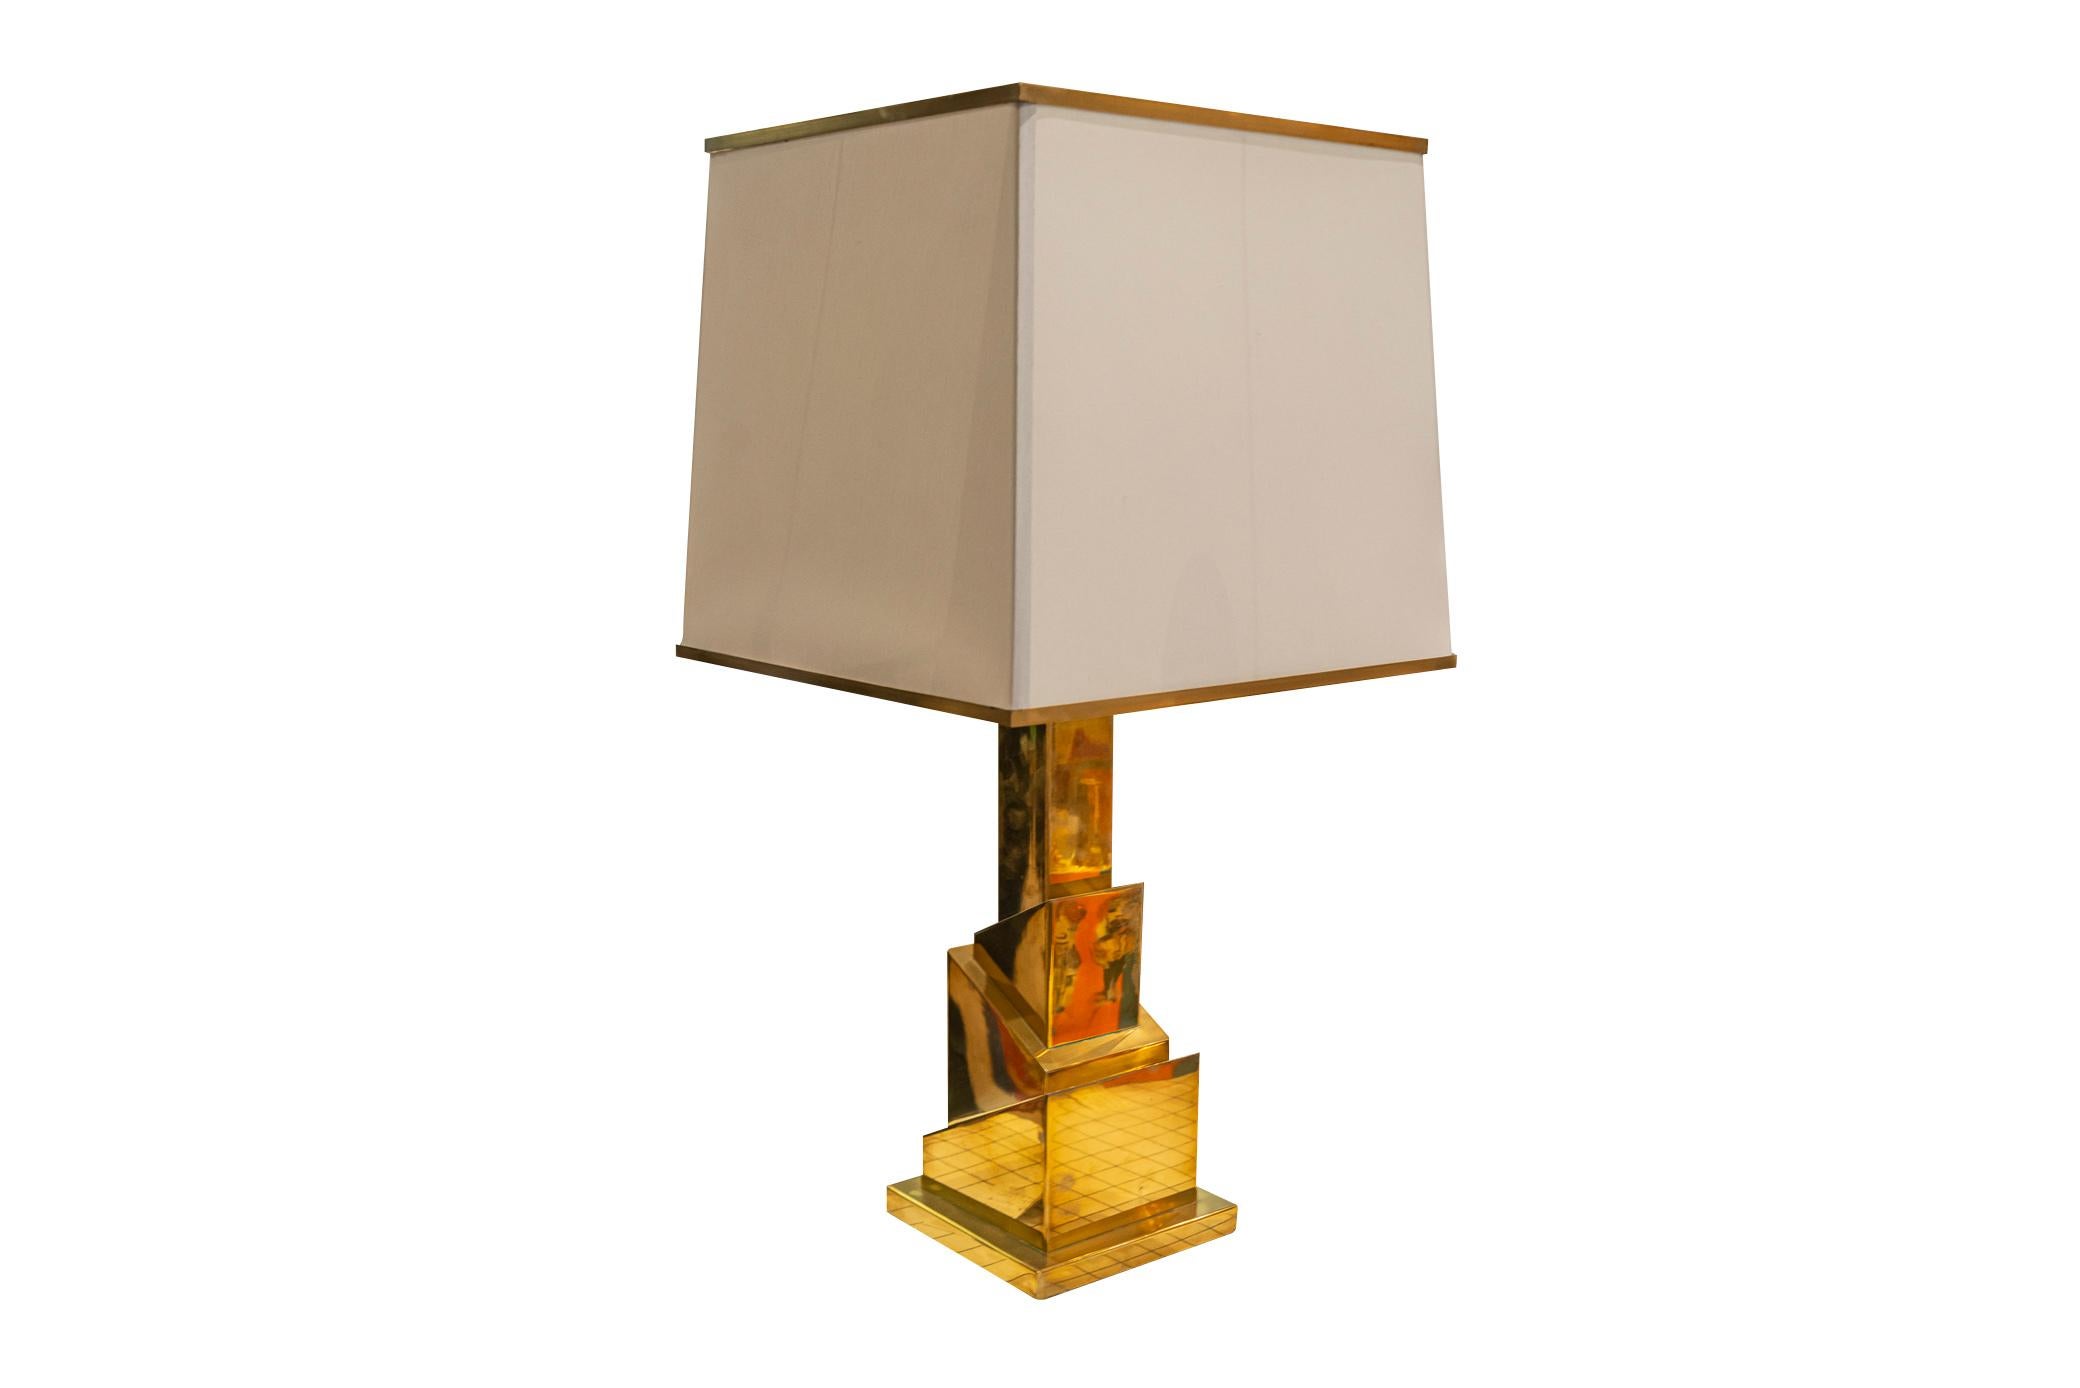 Romeo Rego,
Skyscraper Table Lamp,
Signed at the base,
Italy, circa 1970.

Measures: Height 79 cm, Width 40 cm, Depth 40 cm.

Born in 1904, Italian designer Romeo Rega is one of several 1970s-era designers that are associated with a